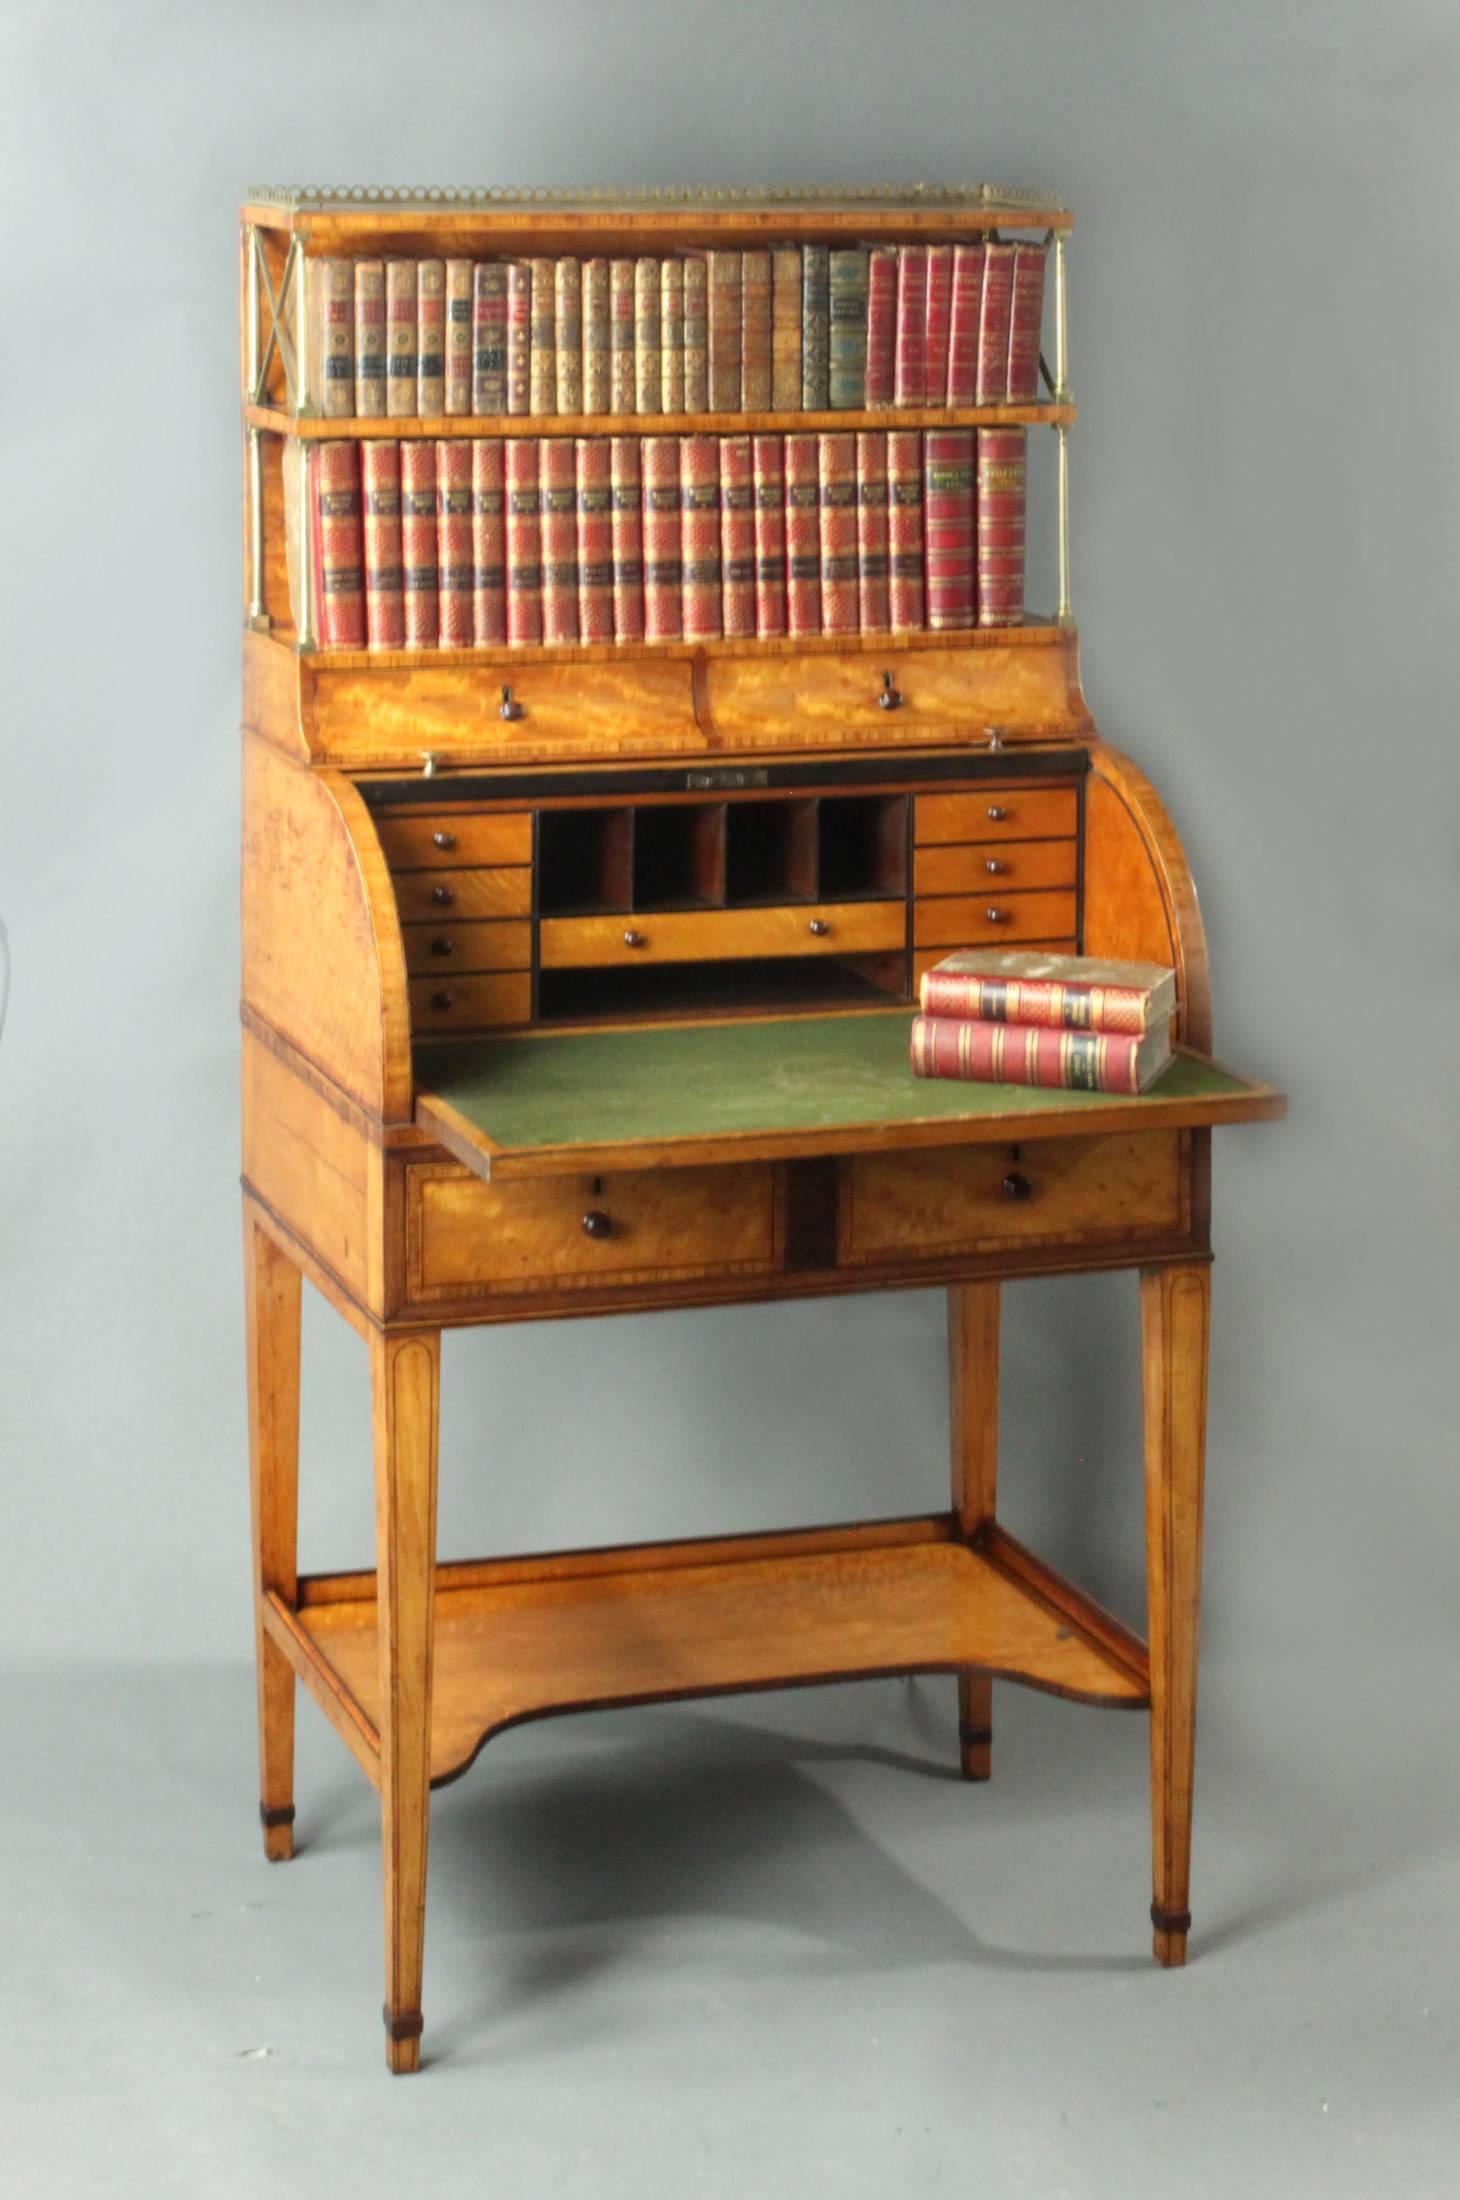 Antique Satinwood Cylinder Bookcase In Good Condition For Sale In Bradford-on-Avon, Wiltshire